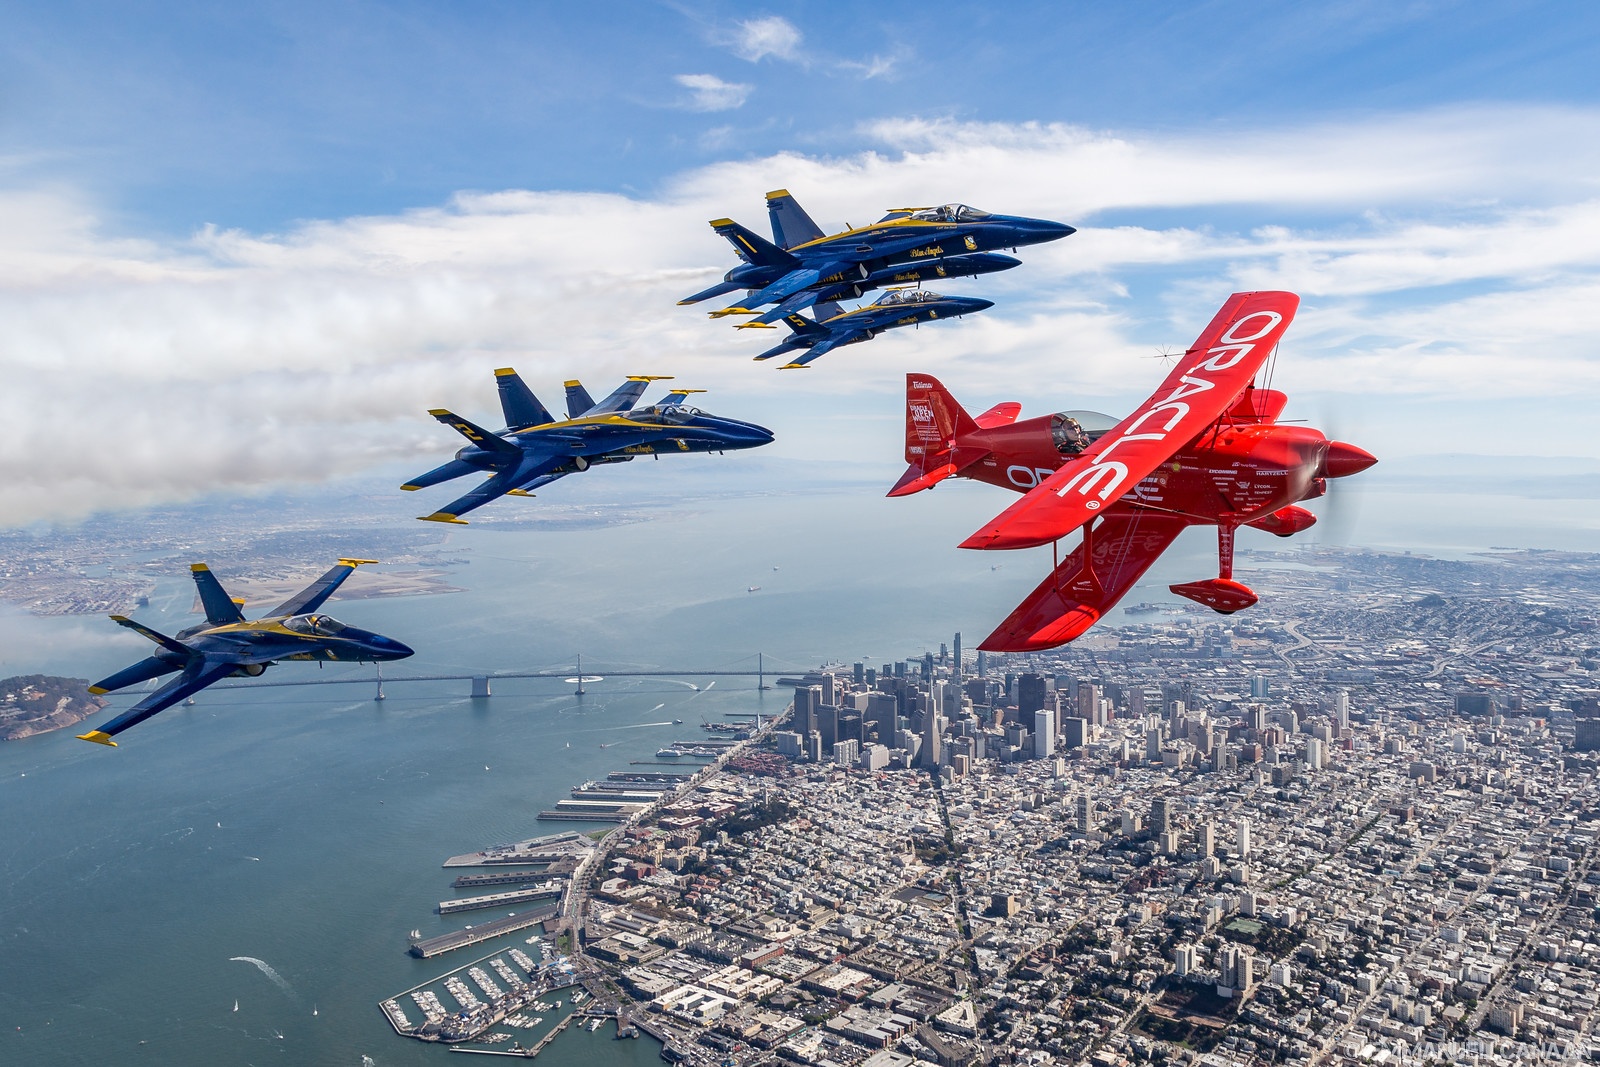 The Blue Angels aerial demonstration team forms up on Sean D. Tucker in his unique Oracle Challenger III aerobatics ship over San Francisco. (photo by Emmanuel Canaan)